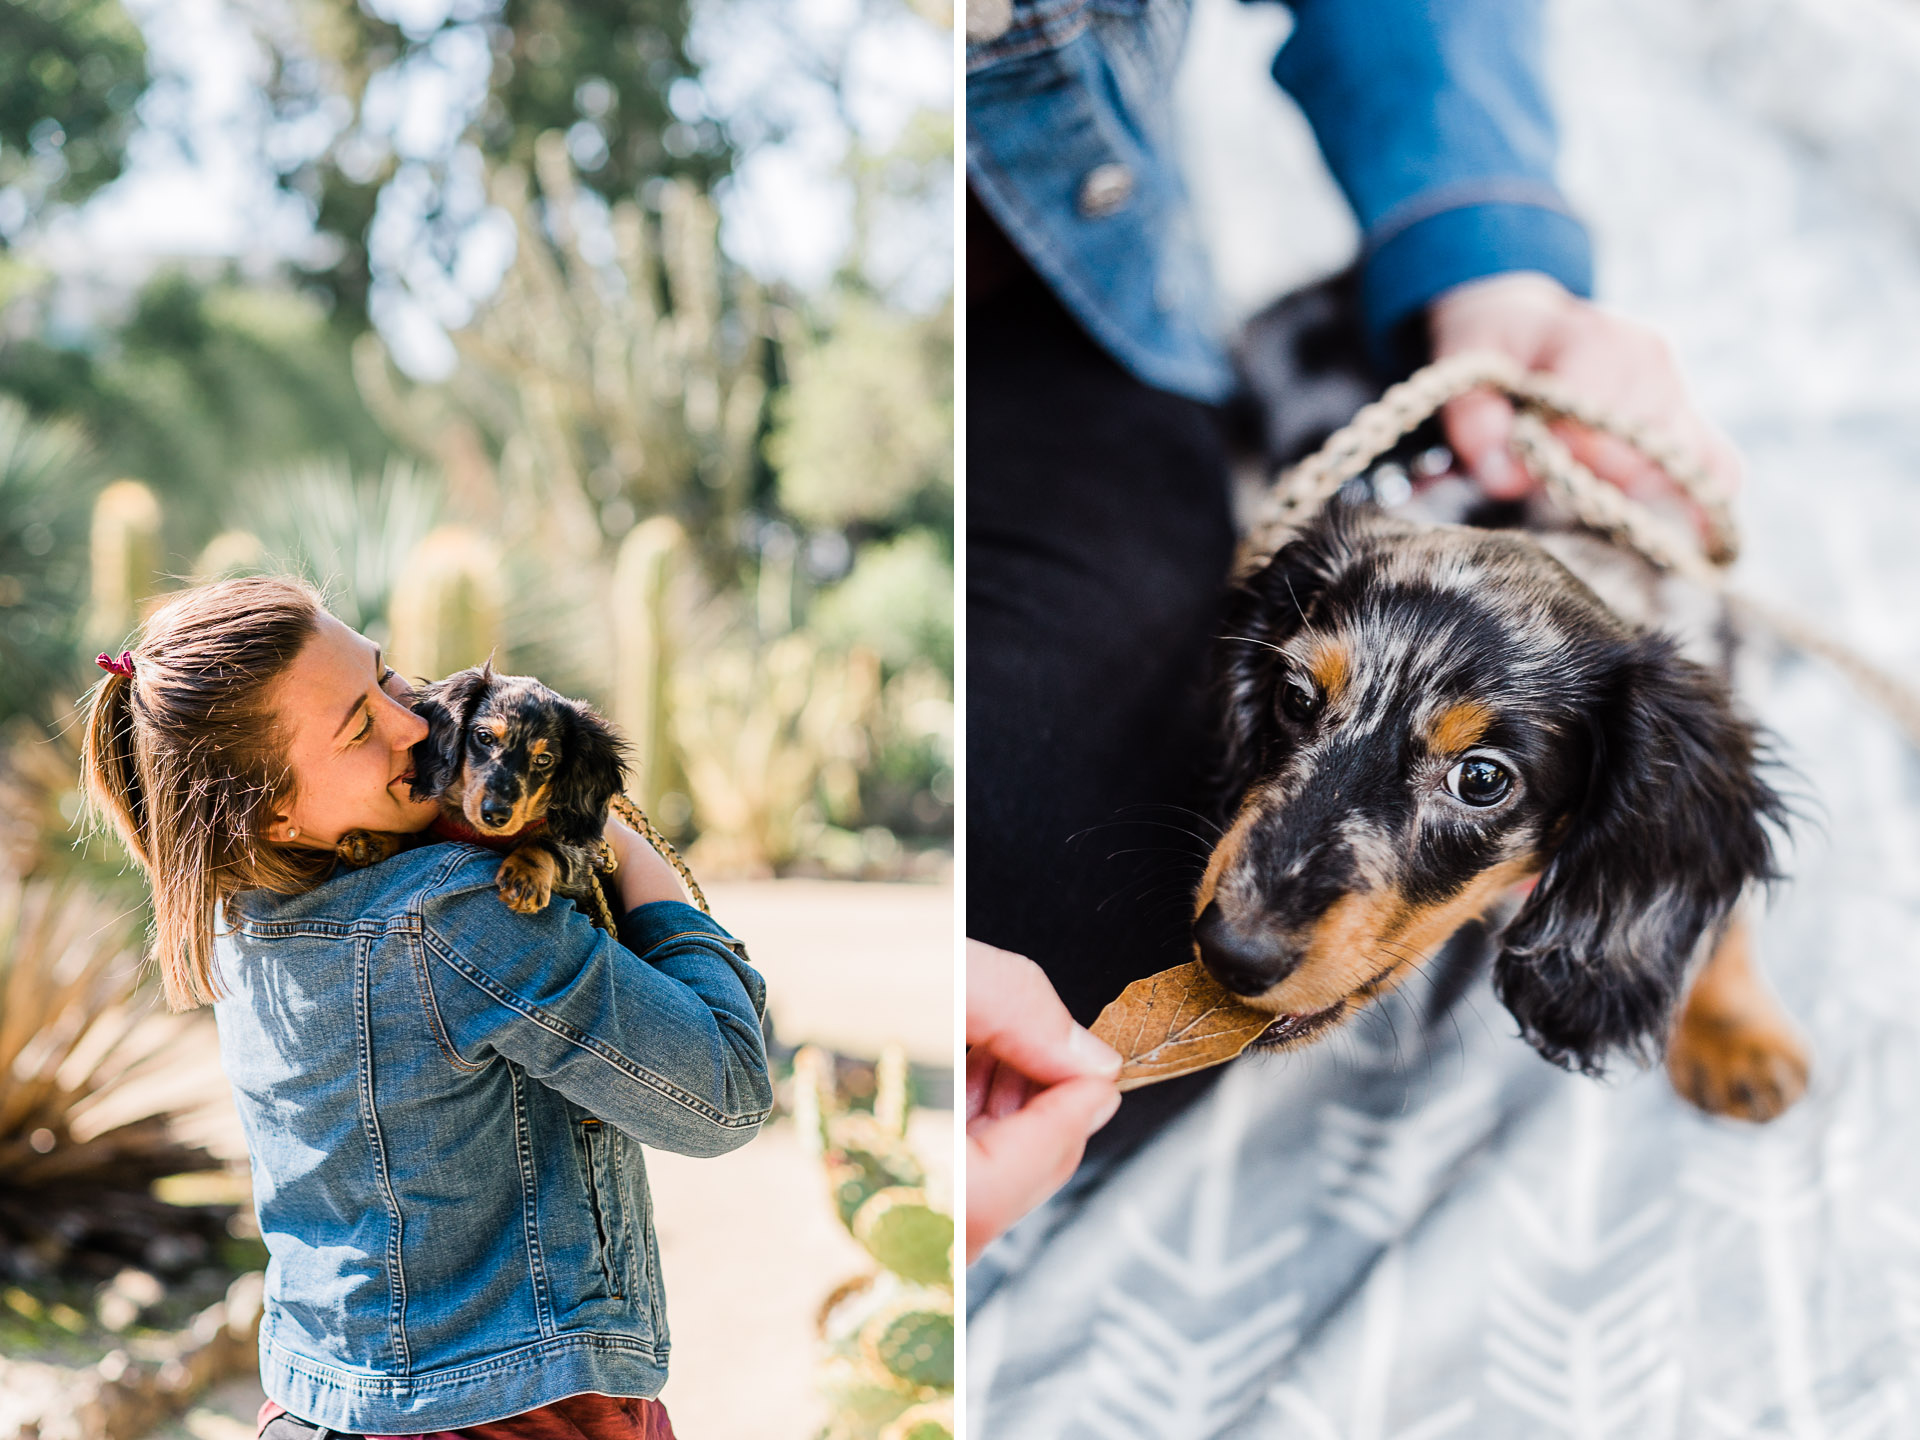 Pet portraits of a long haired Dachshund puppy and his owner